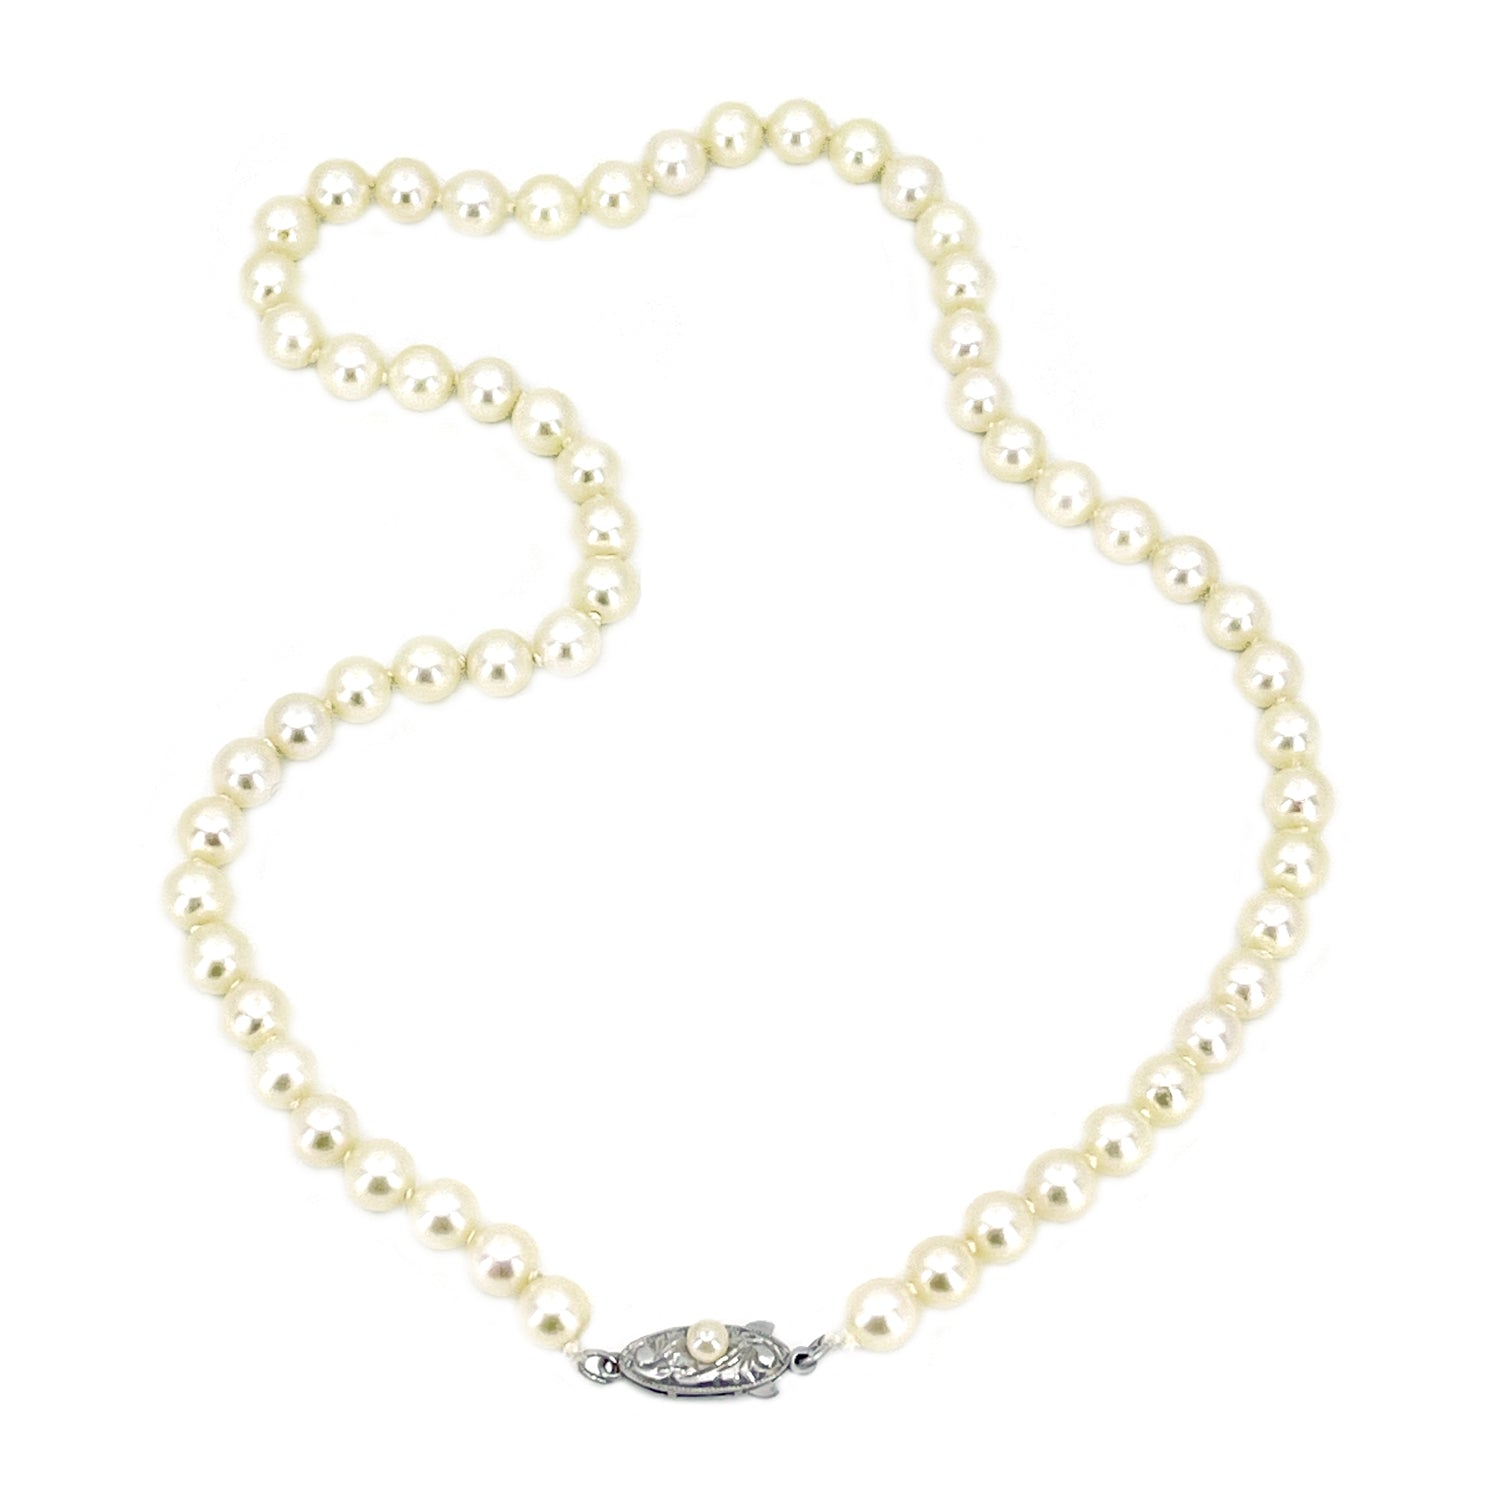 Fuji Pearl Designer Vintage Japanese Cultured Akoya Pearl Strand Necklace Box- Sterling Silver 16 Inch